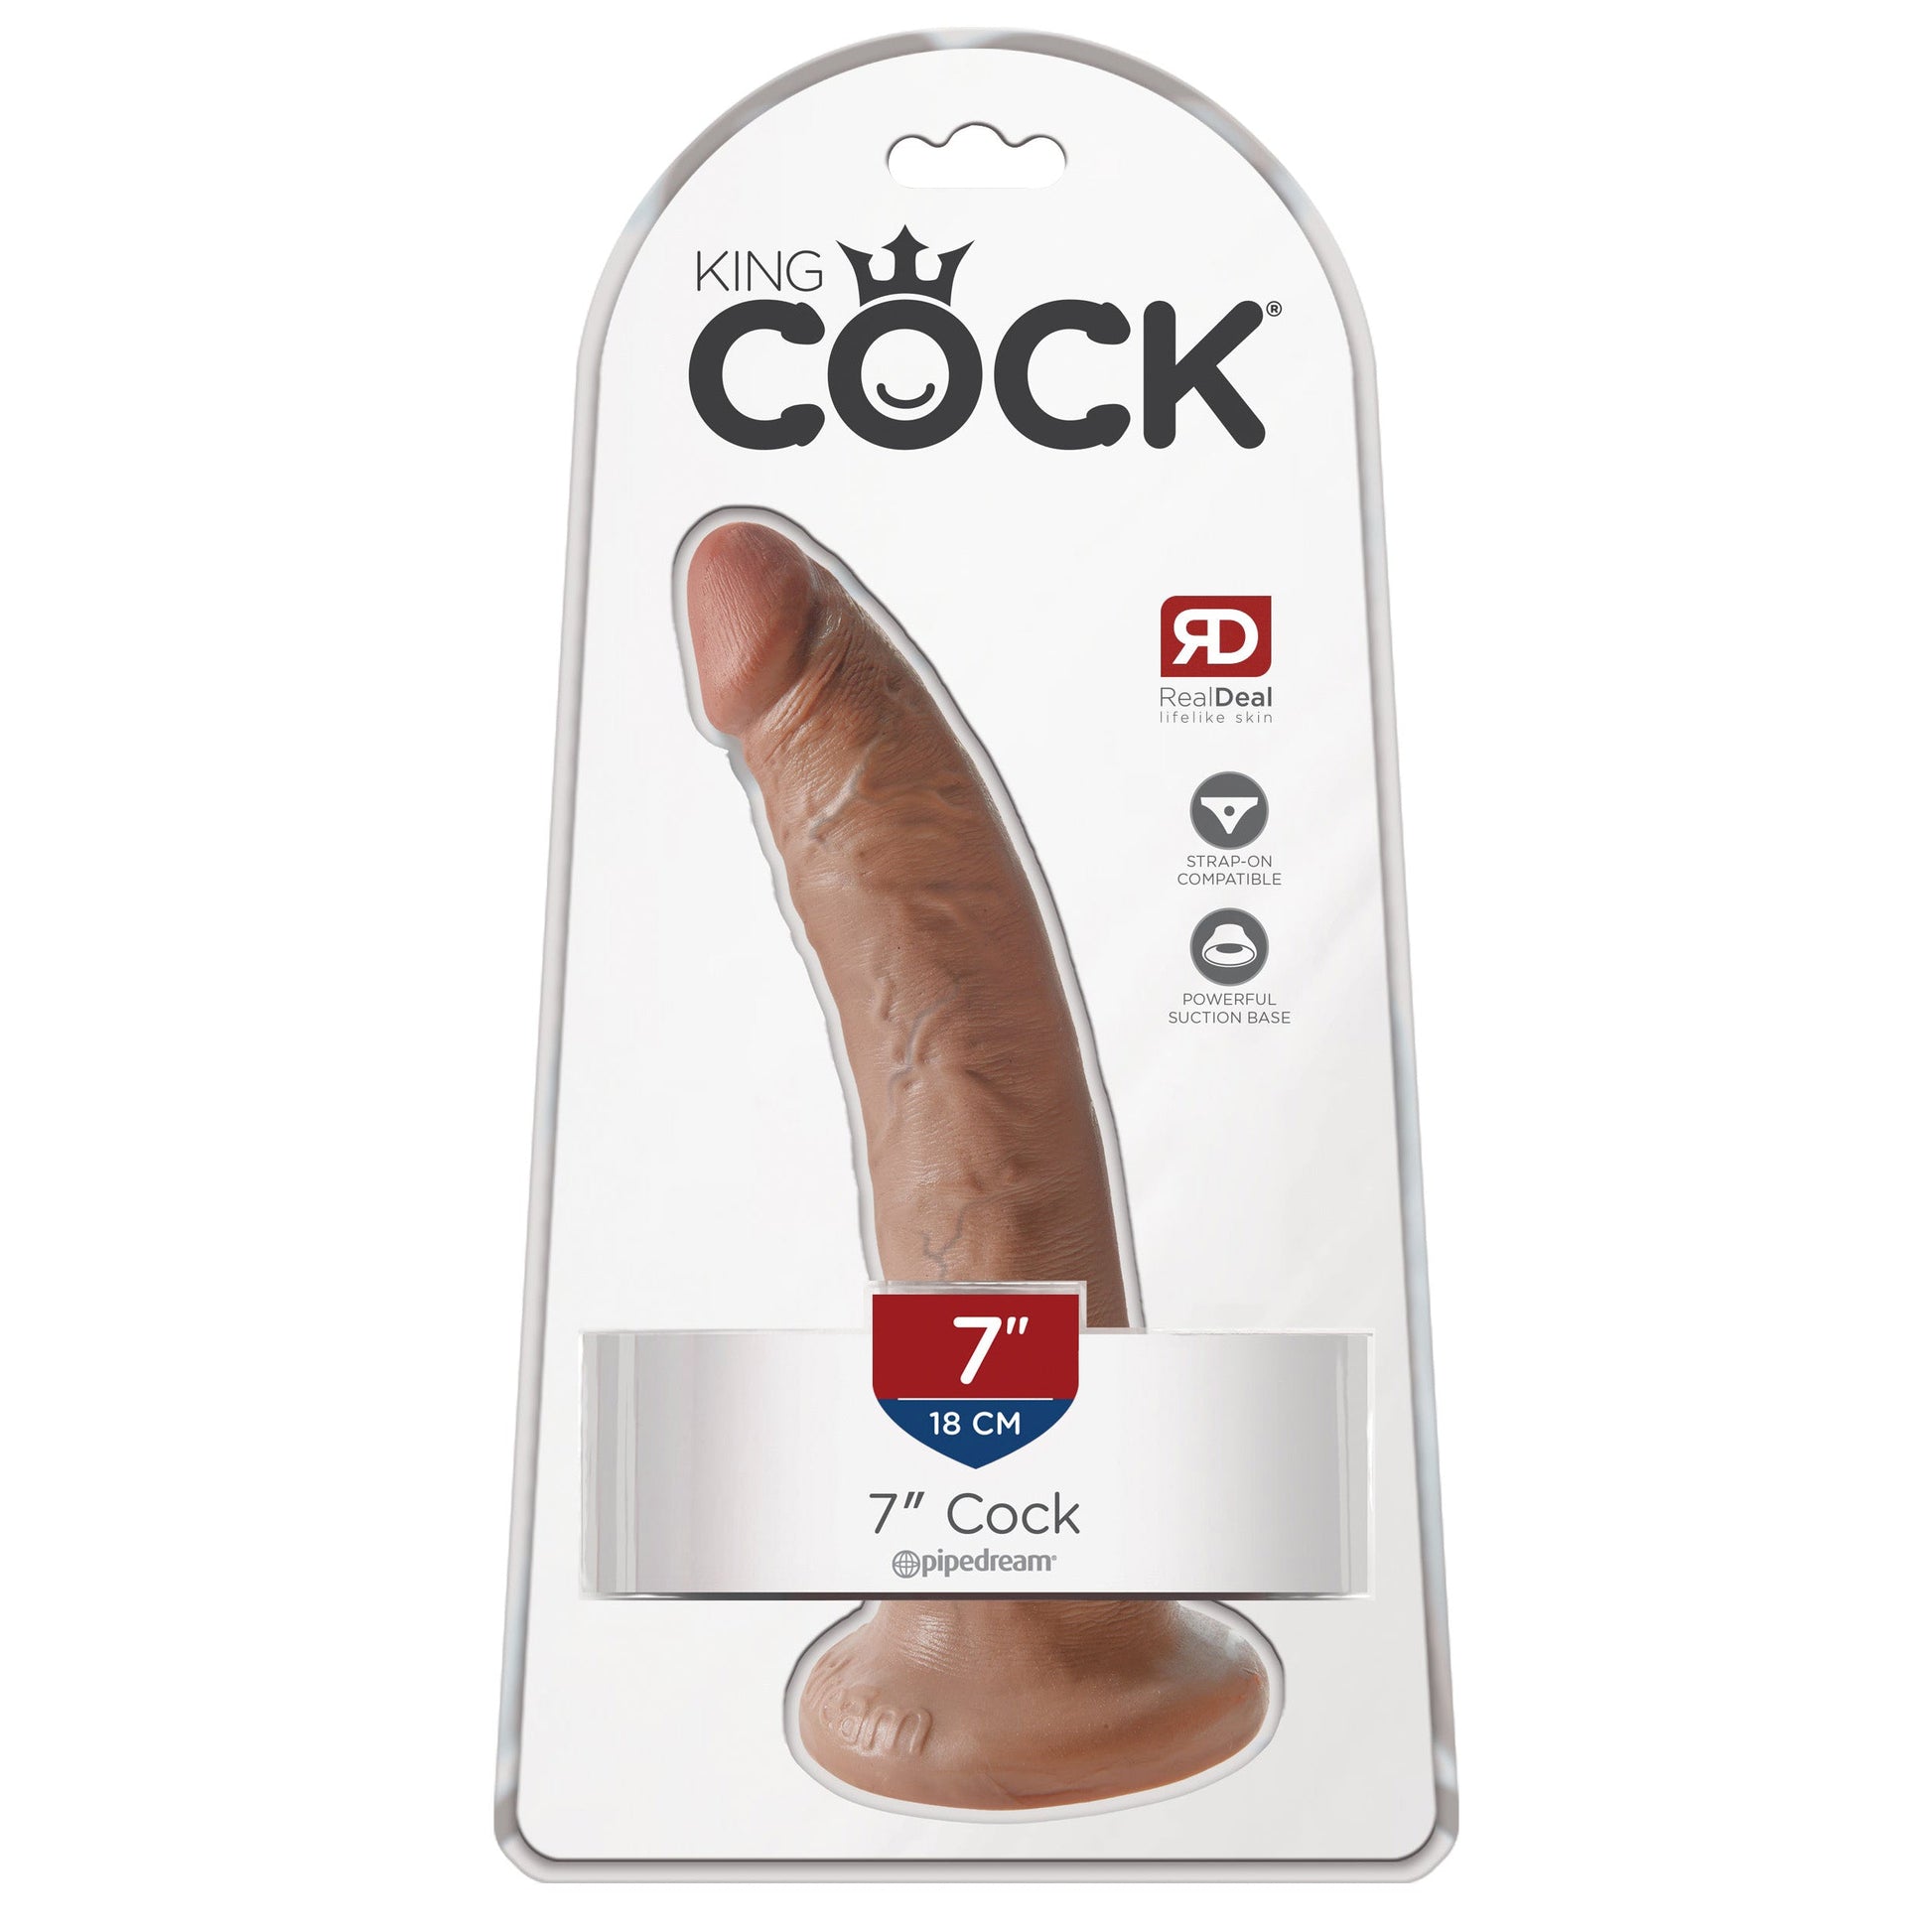 King Cock 7" Cock - Tan - Thorn & Feather Sex Toy Canada